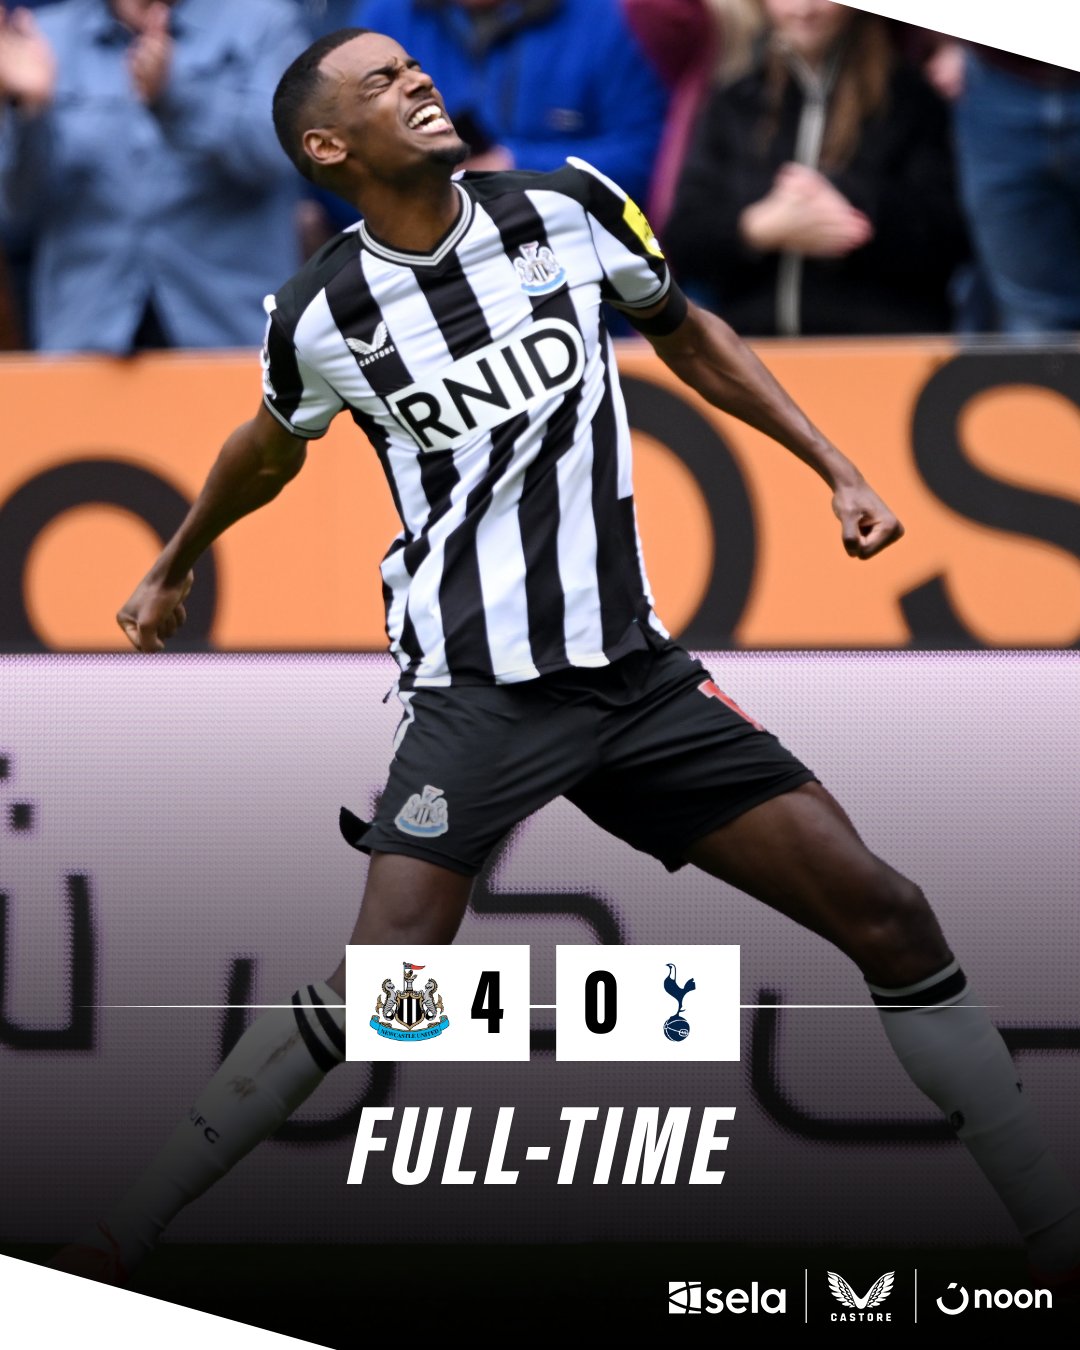 Full-Time | Newcastle United 4 Spurs 1